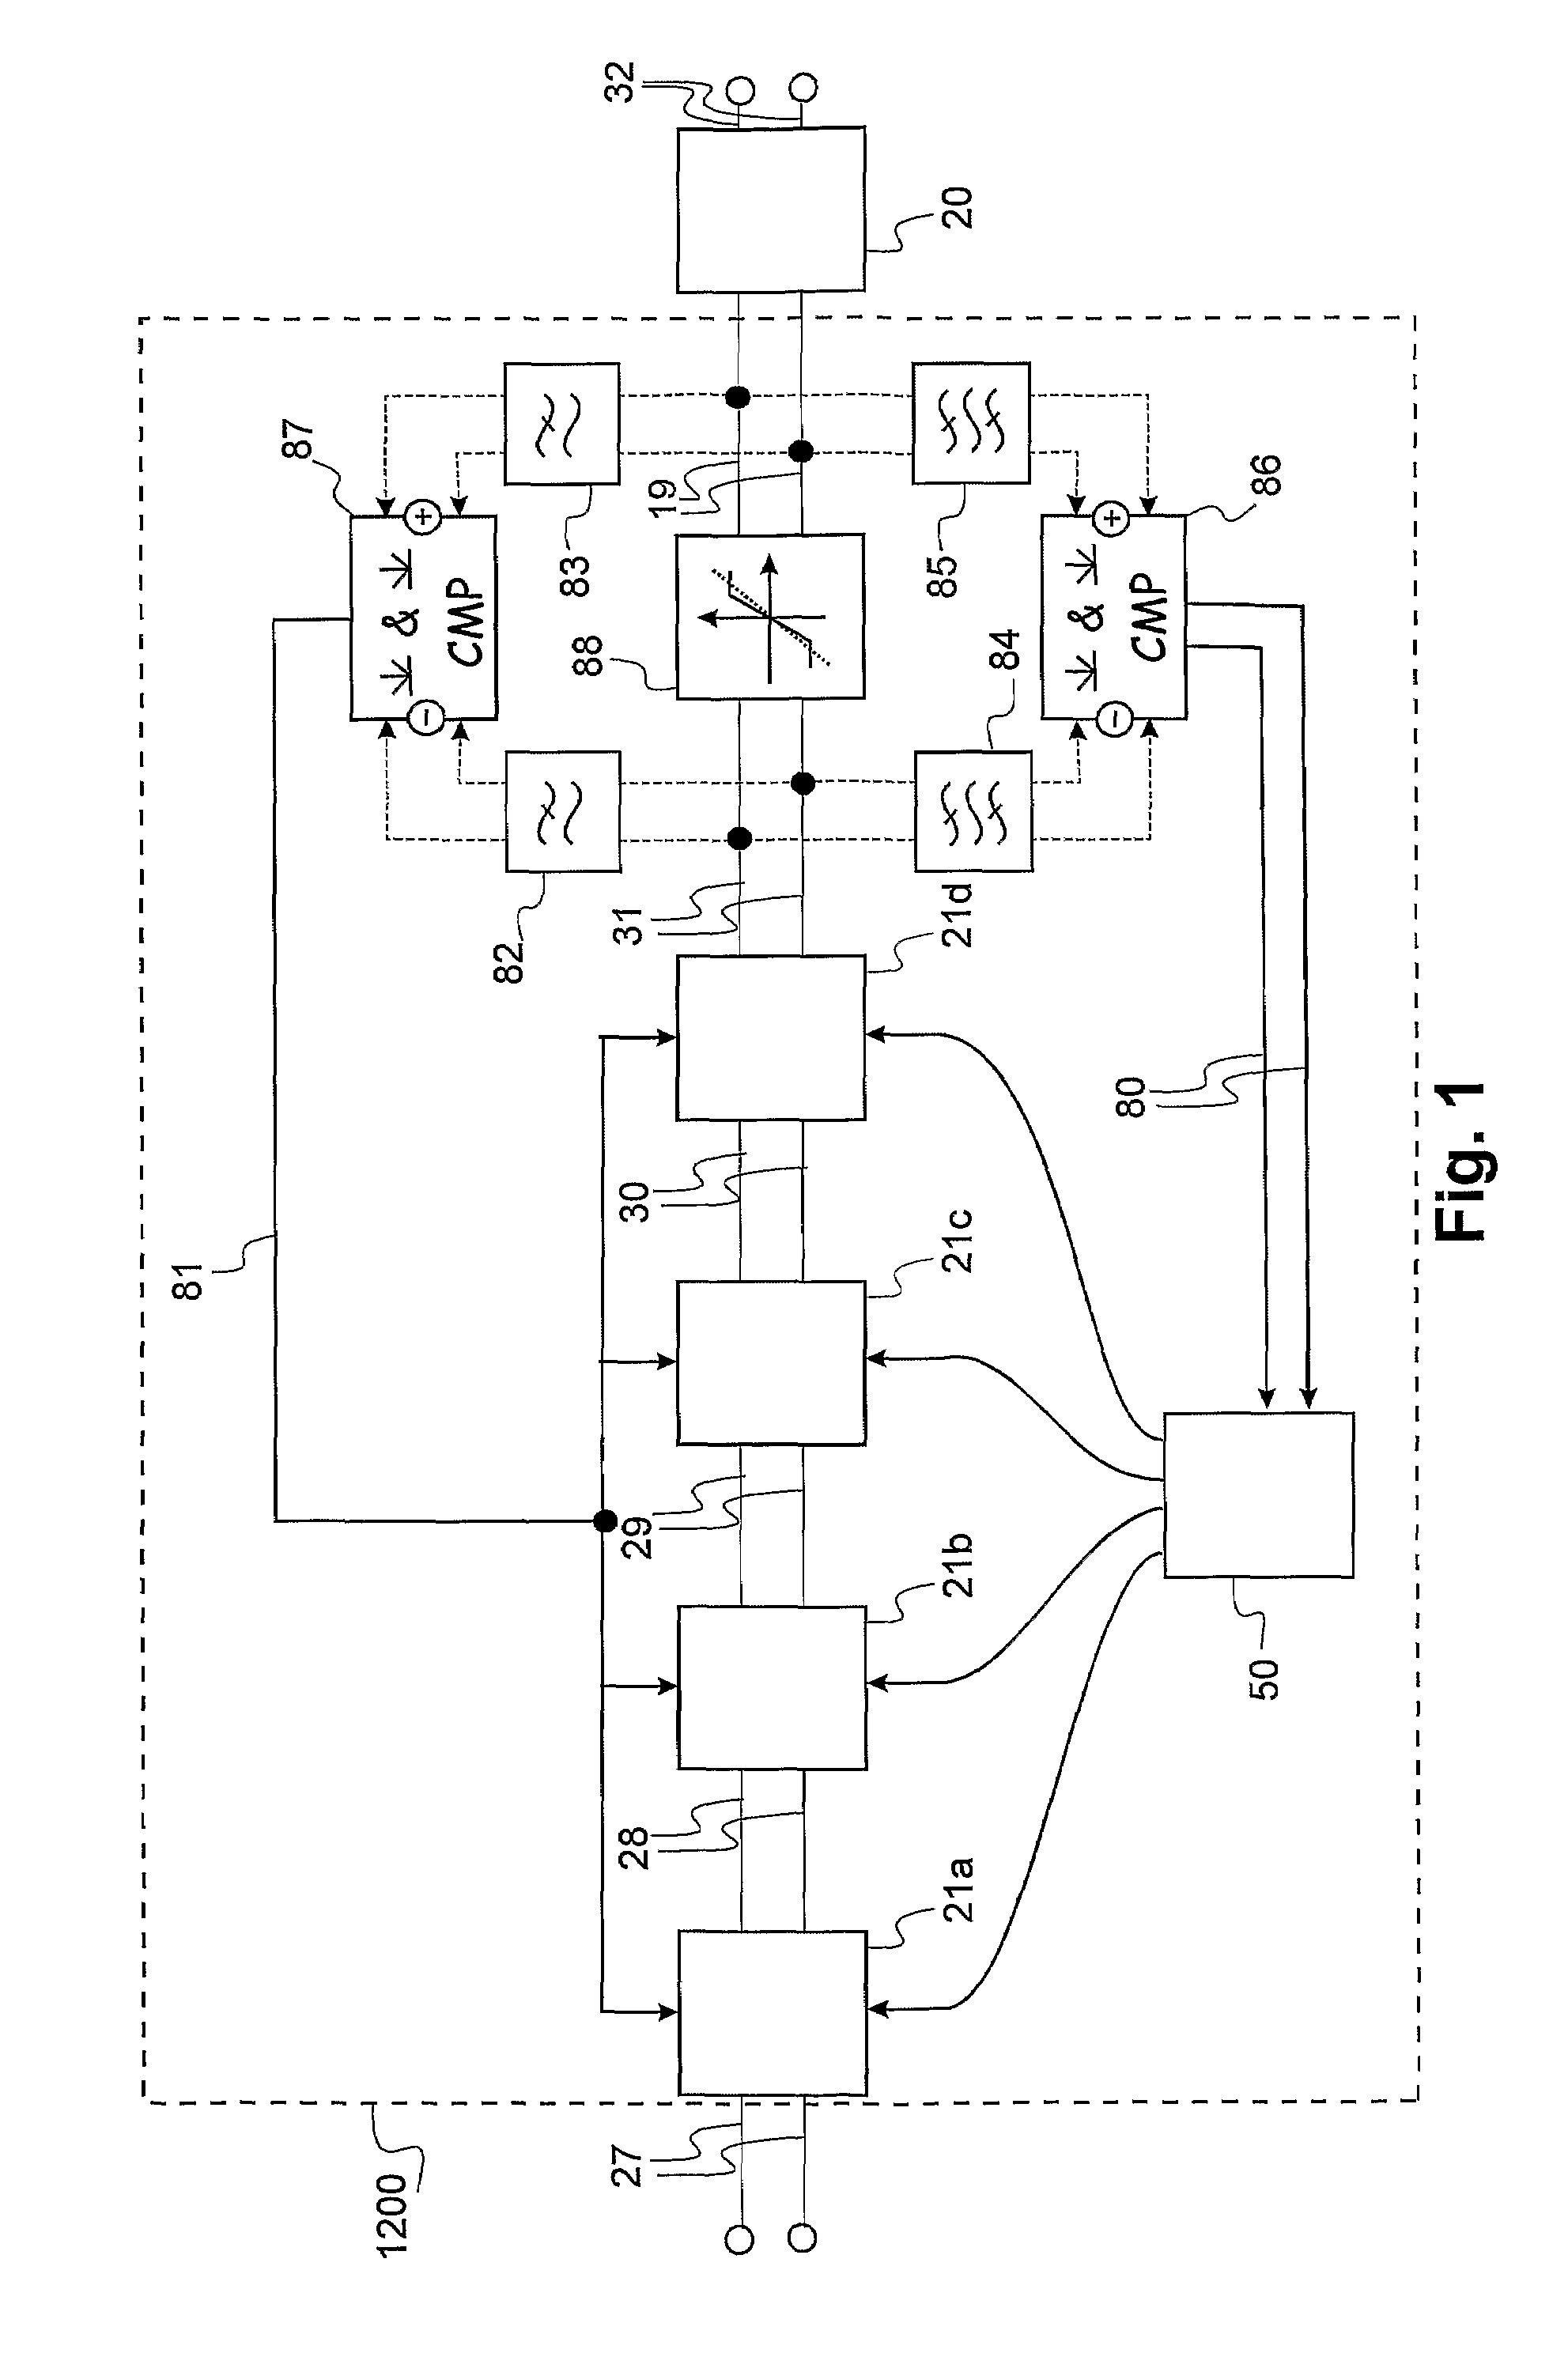 Multistage tuning-tolerant equalizer filter with improved detection mechanisms for lower and higher frequency gain loops